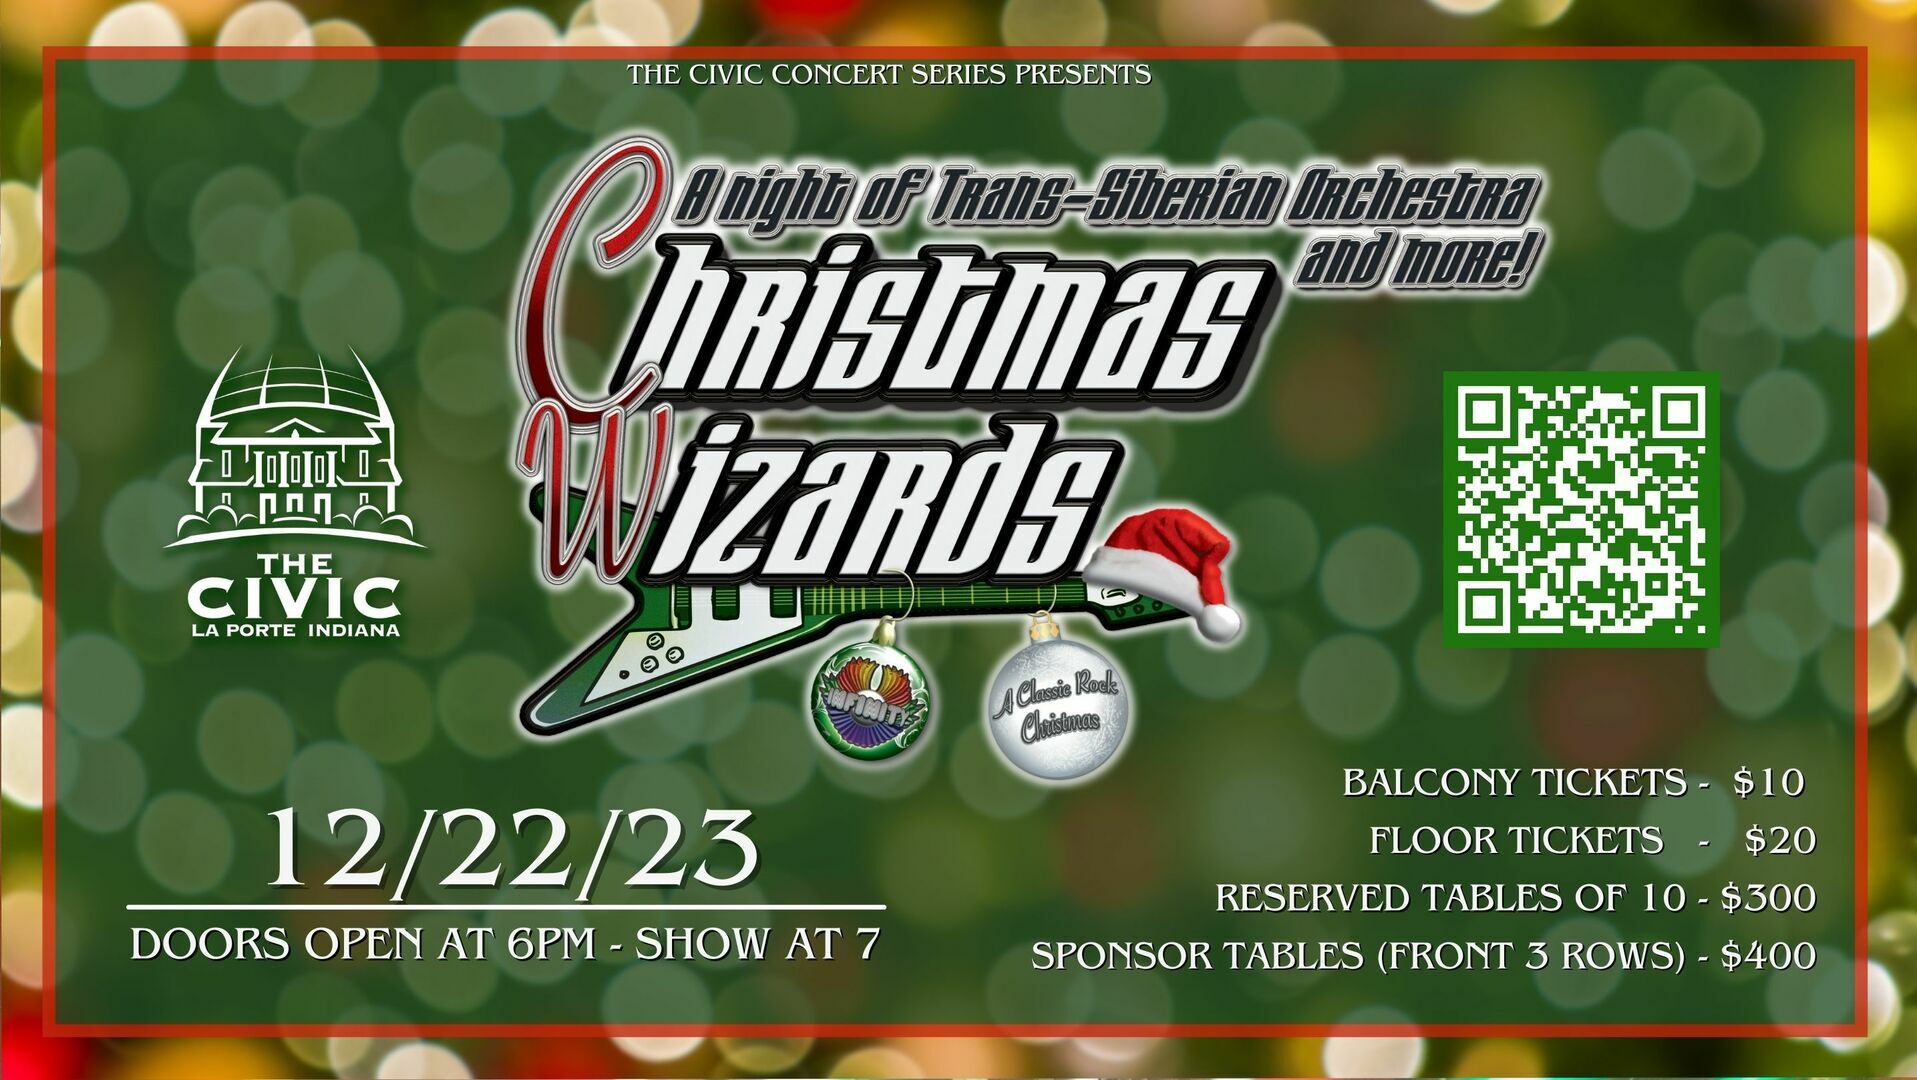 CHRISTMAS WIZARDS(A TRANS SIBERIAN ORCHESTRA TRIBUTE and MORE), La Porte, Indiana, United States